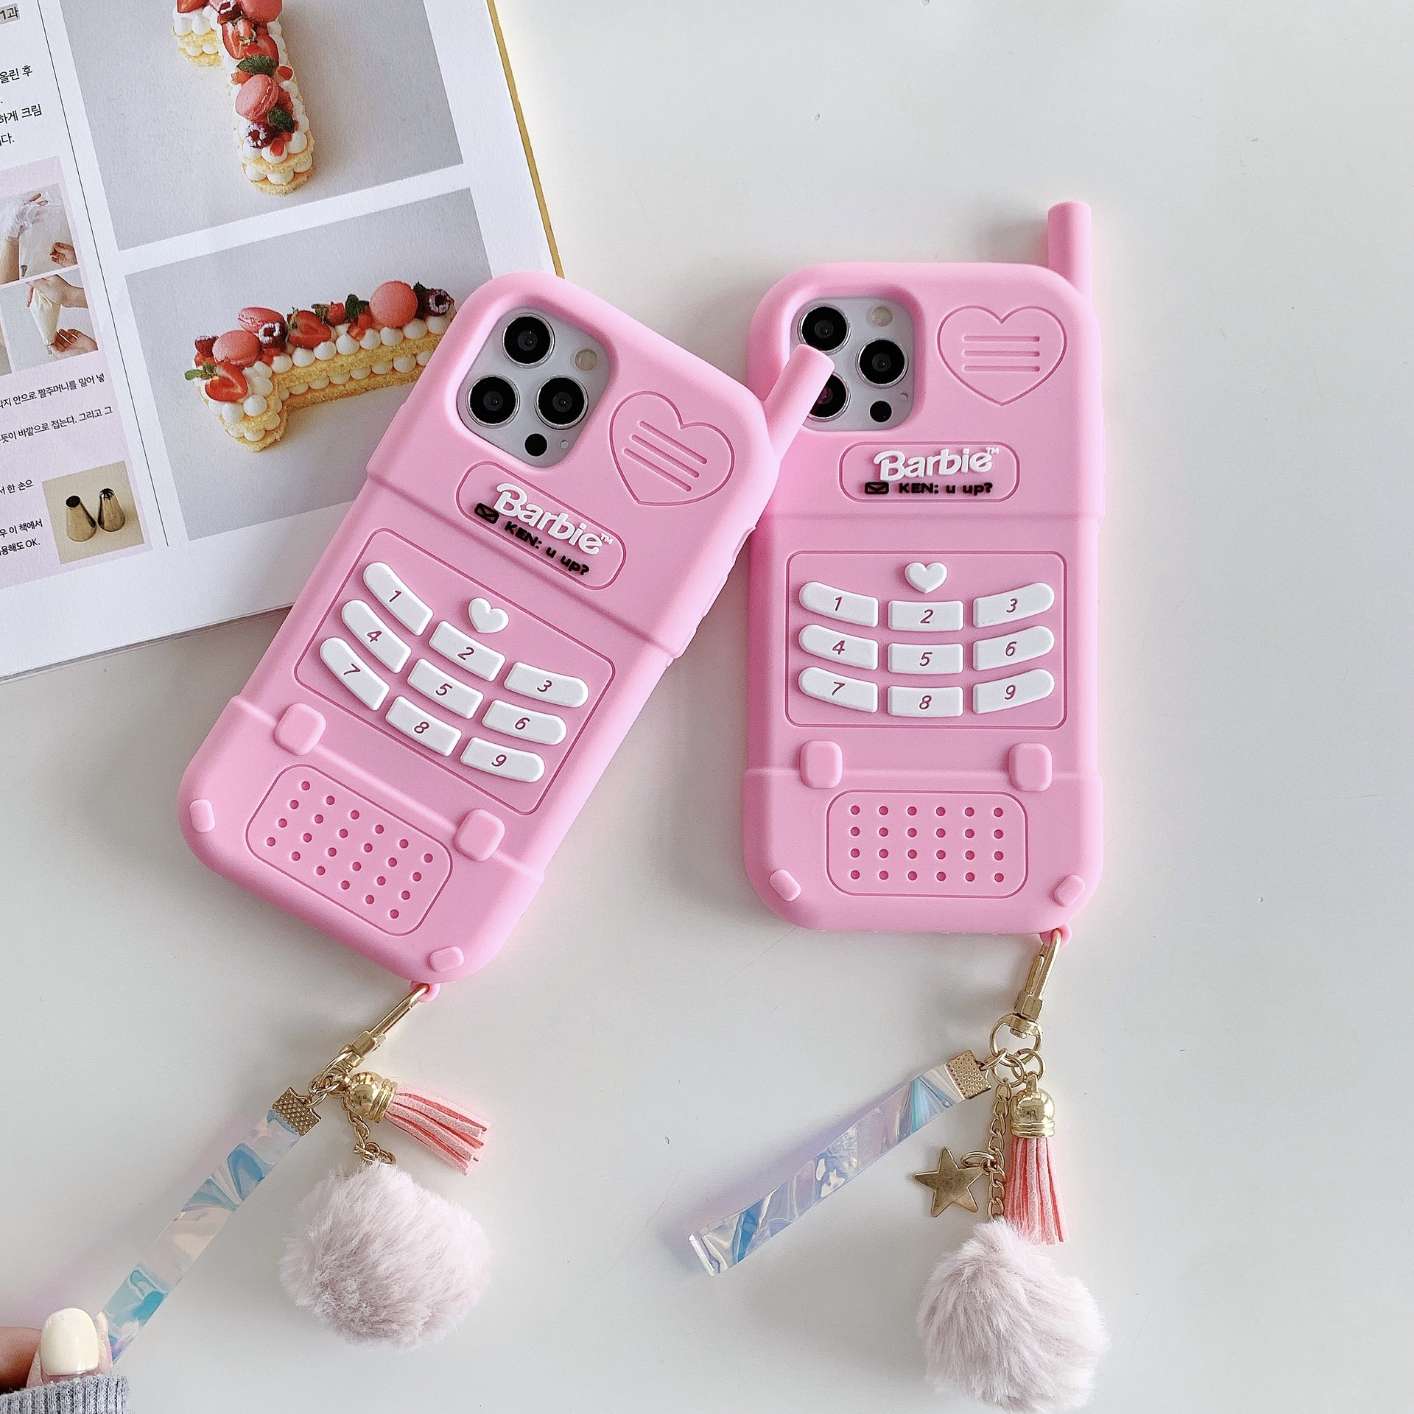 3D Cute Old Mobile Phone Design Phone Case for iPhone 12 Girls Retro Fashion Pink Cover for iPhone 11/6/7/8/XS/X/XR/MAX